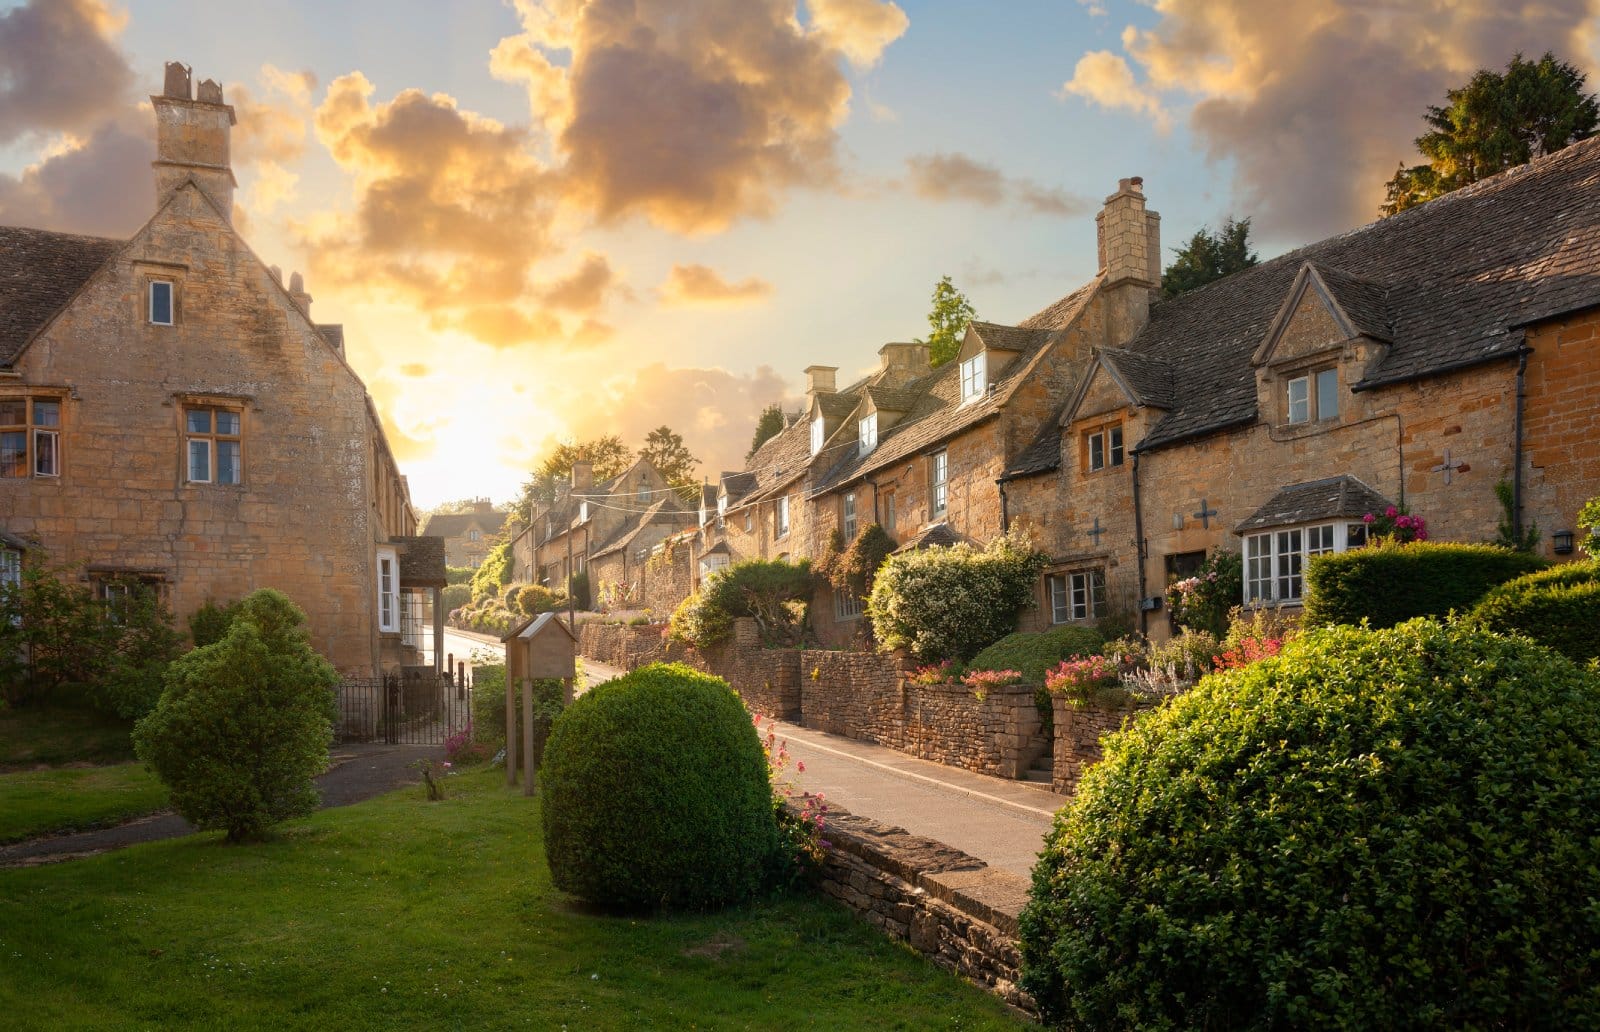 <p class="wp-caption-text">Image Credit: Shutterstock / Andrew Roland</p>  <p><span>The Cotswolds, a designated Area of Outstanding Natural Beauty in England, offers picturesque landscapes, charming villages, and a slower pace of life ideal for senior travelers. The region’s rolling hills, historic market towns, and country gardens are perfect for leisurely exploration. The Cotswolds is also home to traditional English pubs, tea rooms, and B&Bs, providing a quintessentially British experience. Walking paths like the Cotswold Way offer gentle strolls through the countryside, with plenty of stops for tea and scones.</span></p>